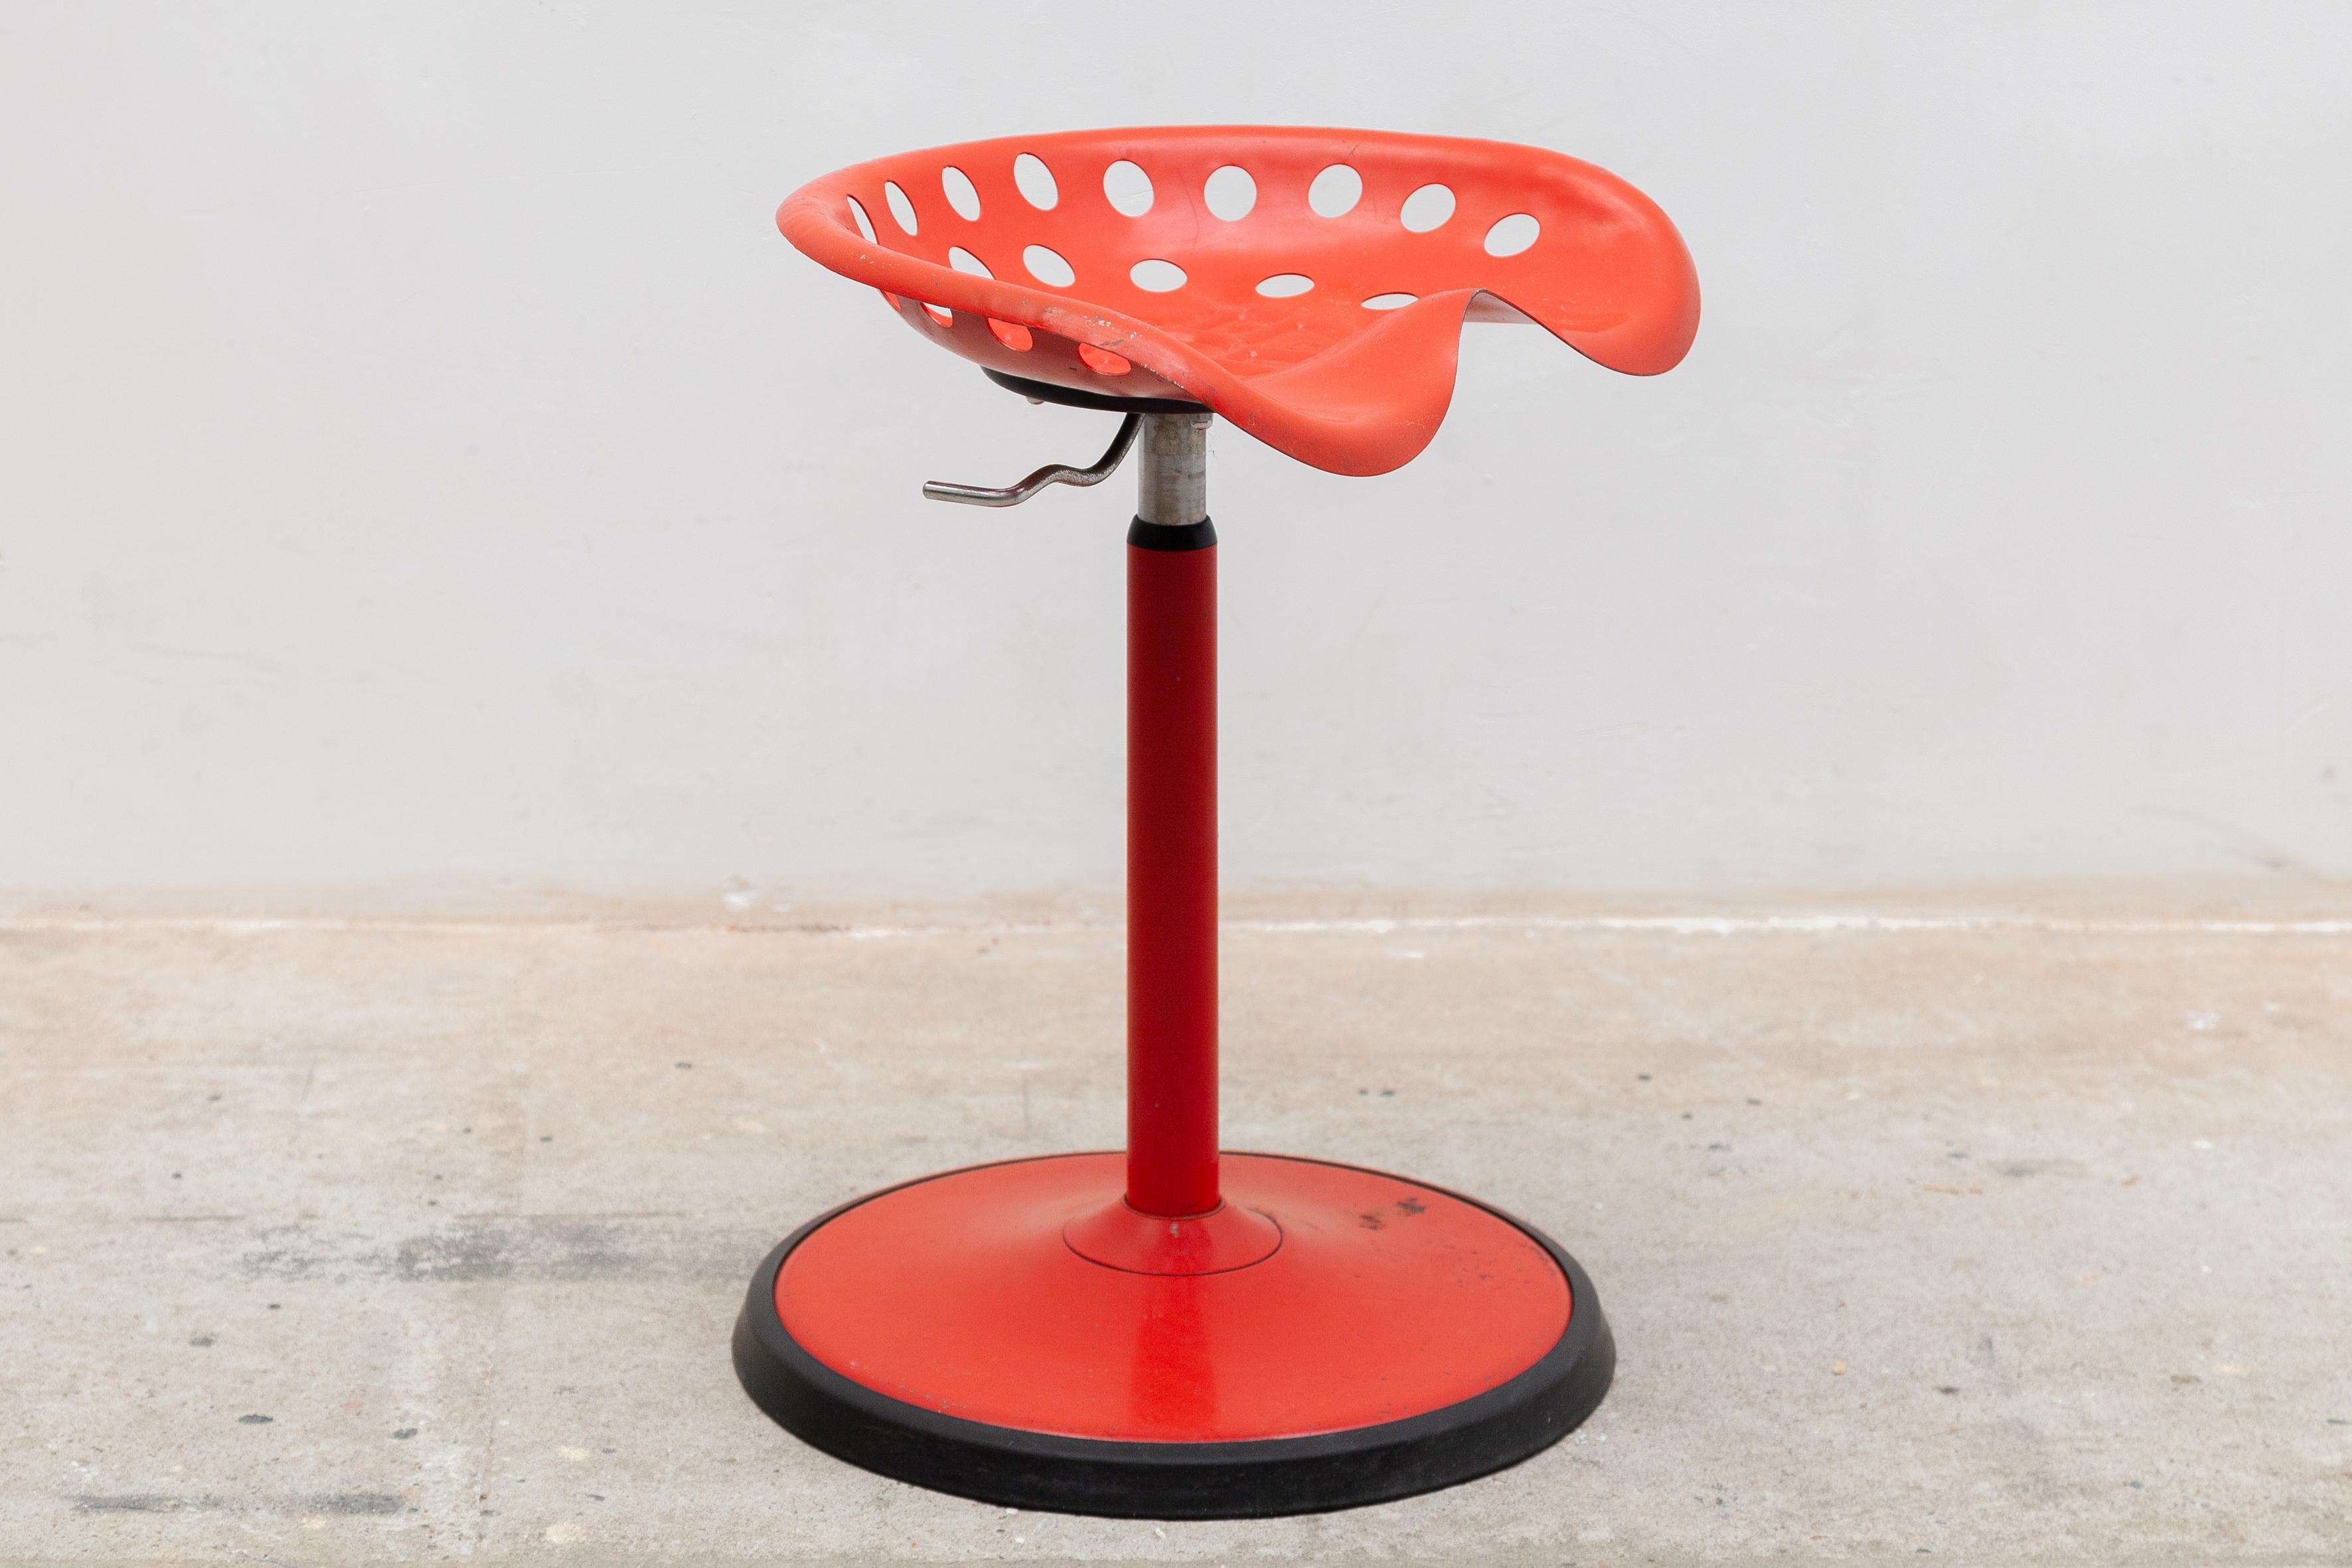 Beautiful red adjustable stool designed by Etienne Fermigier for Mirima in the 70s.The stool is adjustable in height maximum height is 70cm and has an iron red lacquered base with rubber. The stool is in good condition signs of wear appropriate to